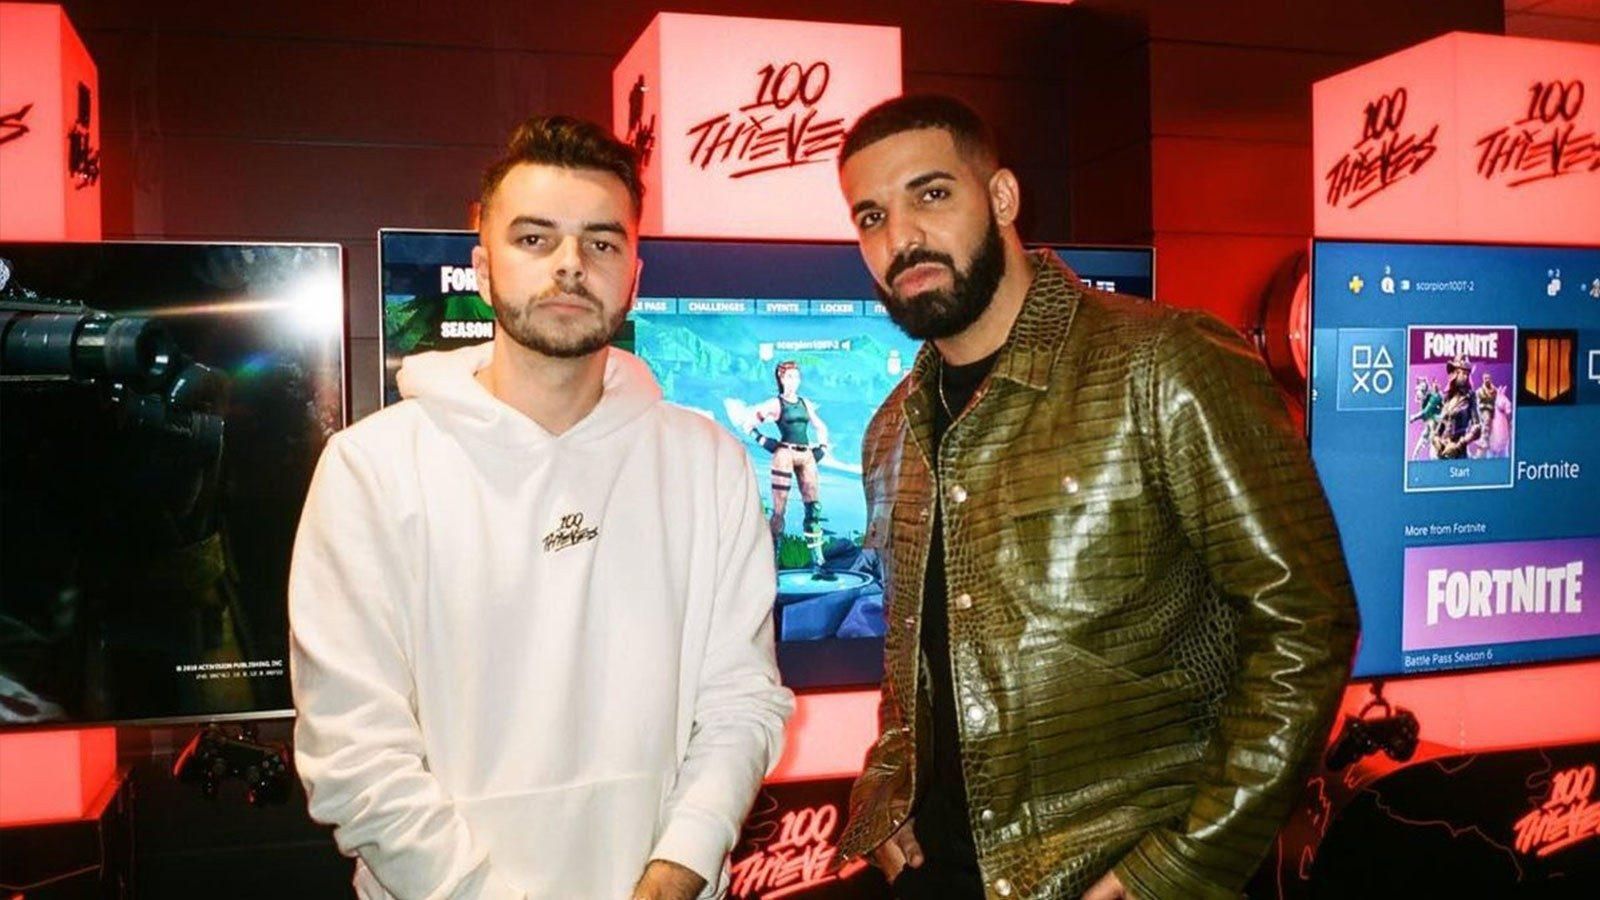 100thieves, Twitter - Drake Invests In 100 Thieves - HD Wallpaper 